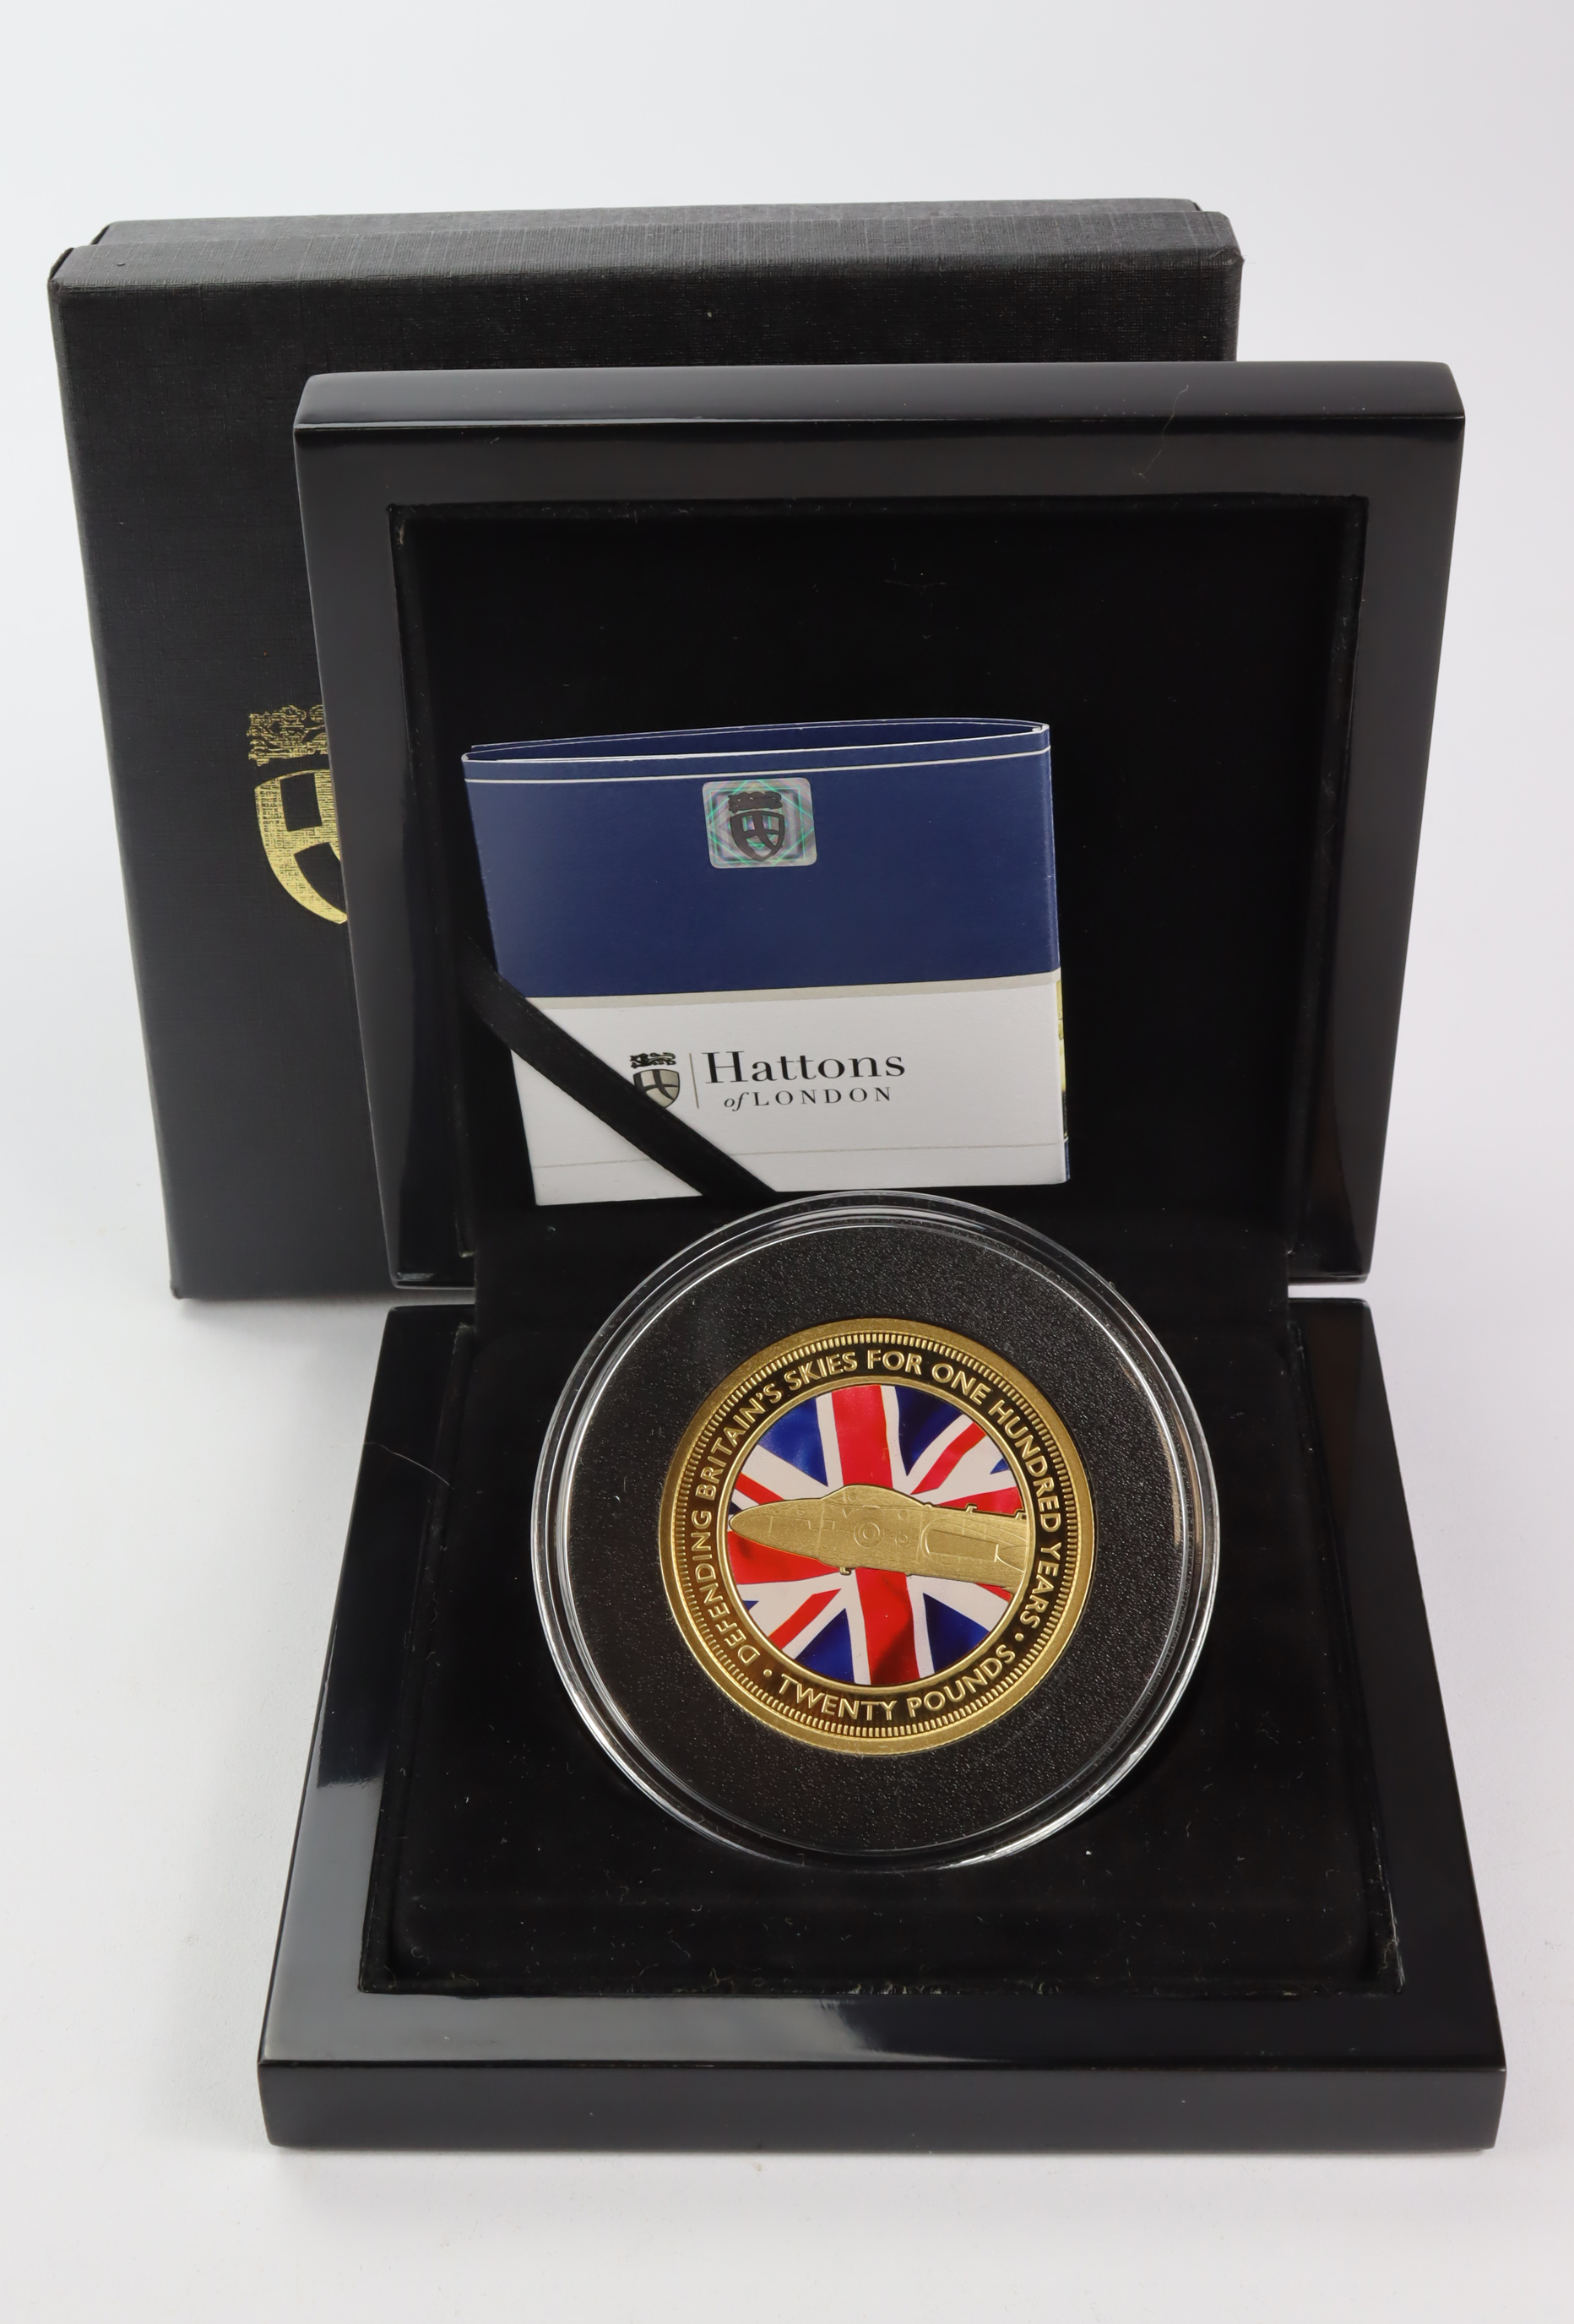 Tristan Da Cunha Twenty Pounds 2018 struck in 22ct gold (62.2g) to a proof finish. Mintage of only